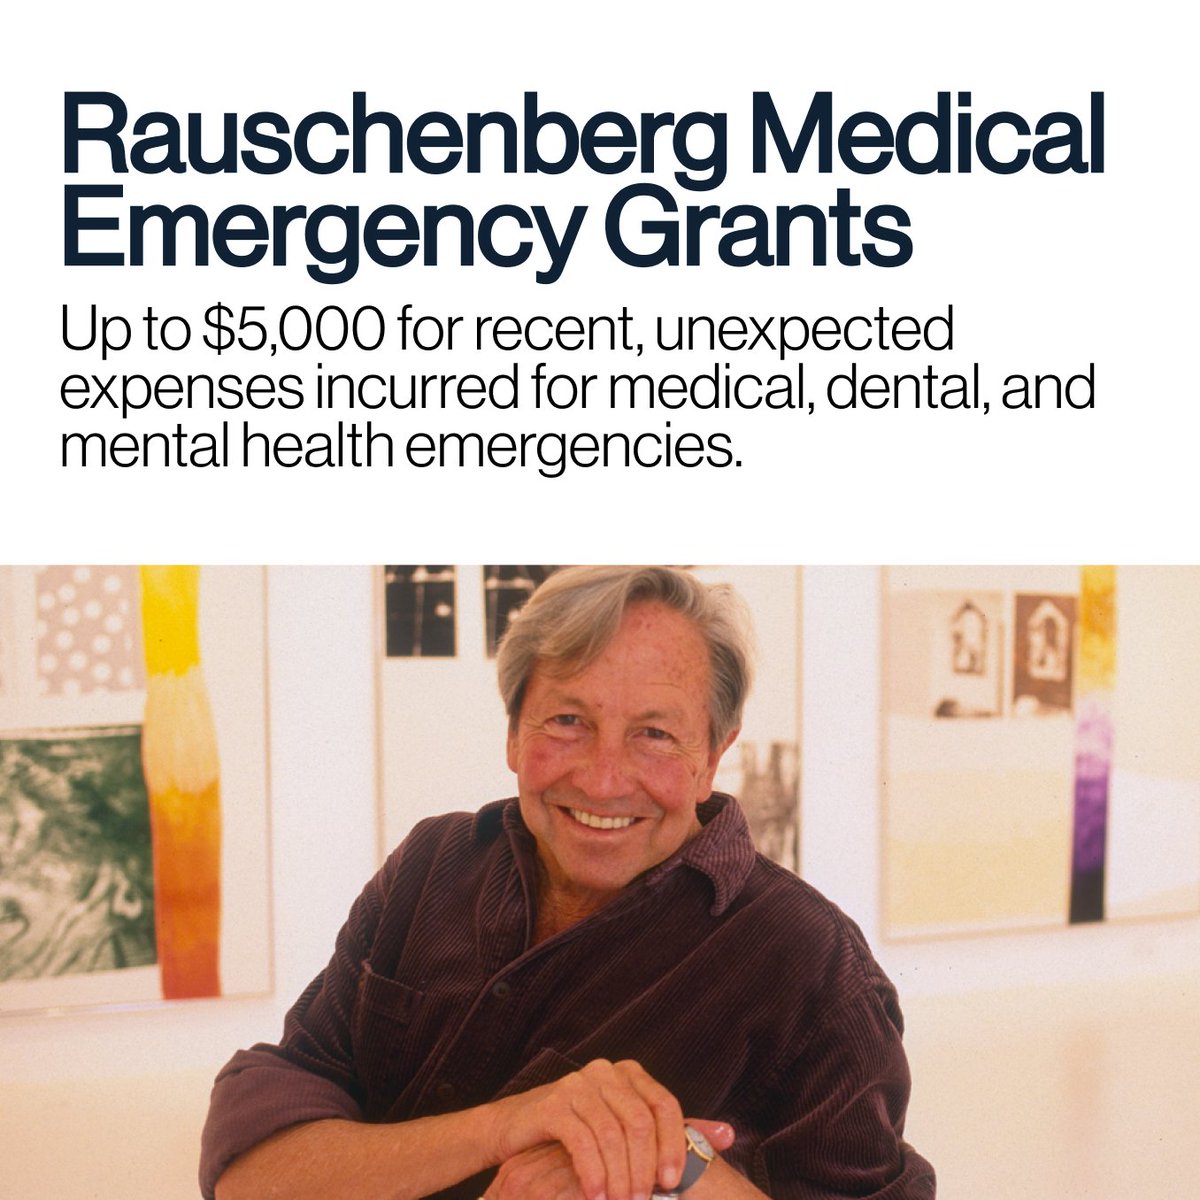 The Rauschenberg Medical Emergency Grants program provides grants of up to $5,000 for recent unexpected medical, dental, & mental health emergencies. Apply now thru May 17 for emergency treatment that occurred October 1, 2023 or later. bit.ly/2HEzfRi @rrauschenberg